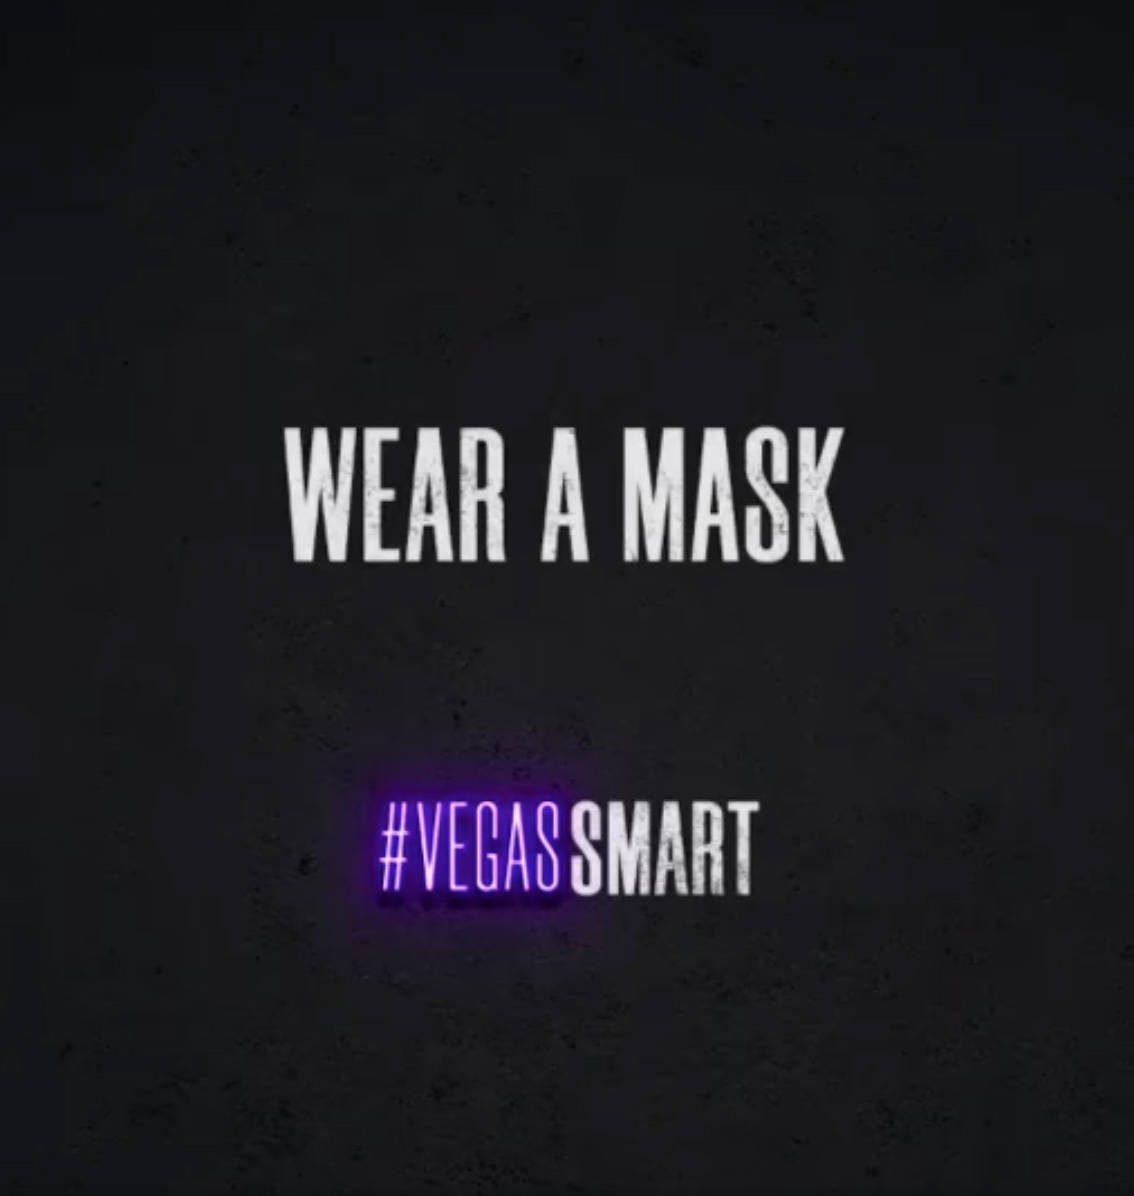 The Las Vegas Convention and Visitors Authority launched its #VegasSmart social media campaign ...